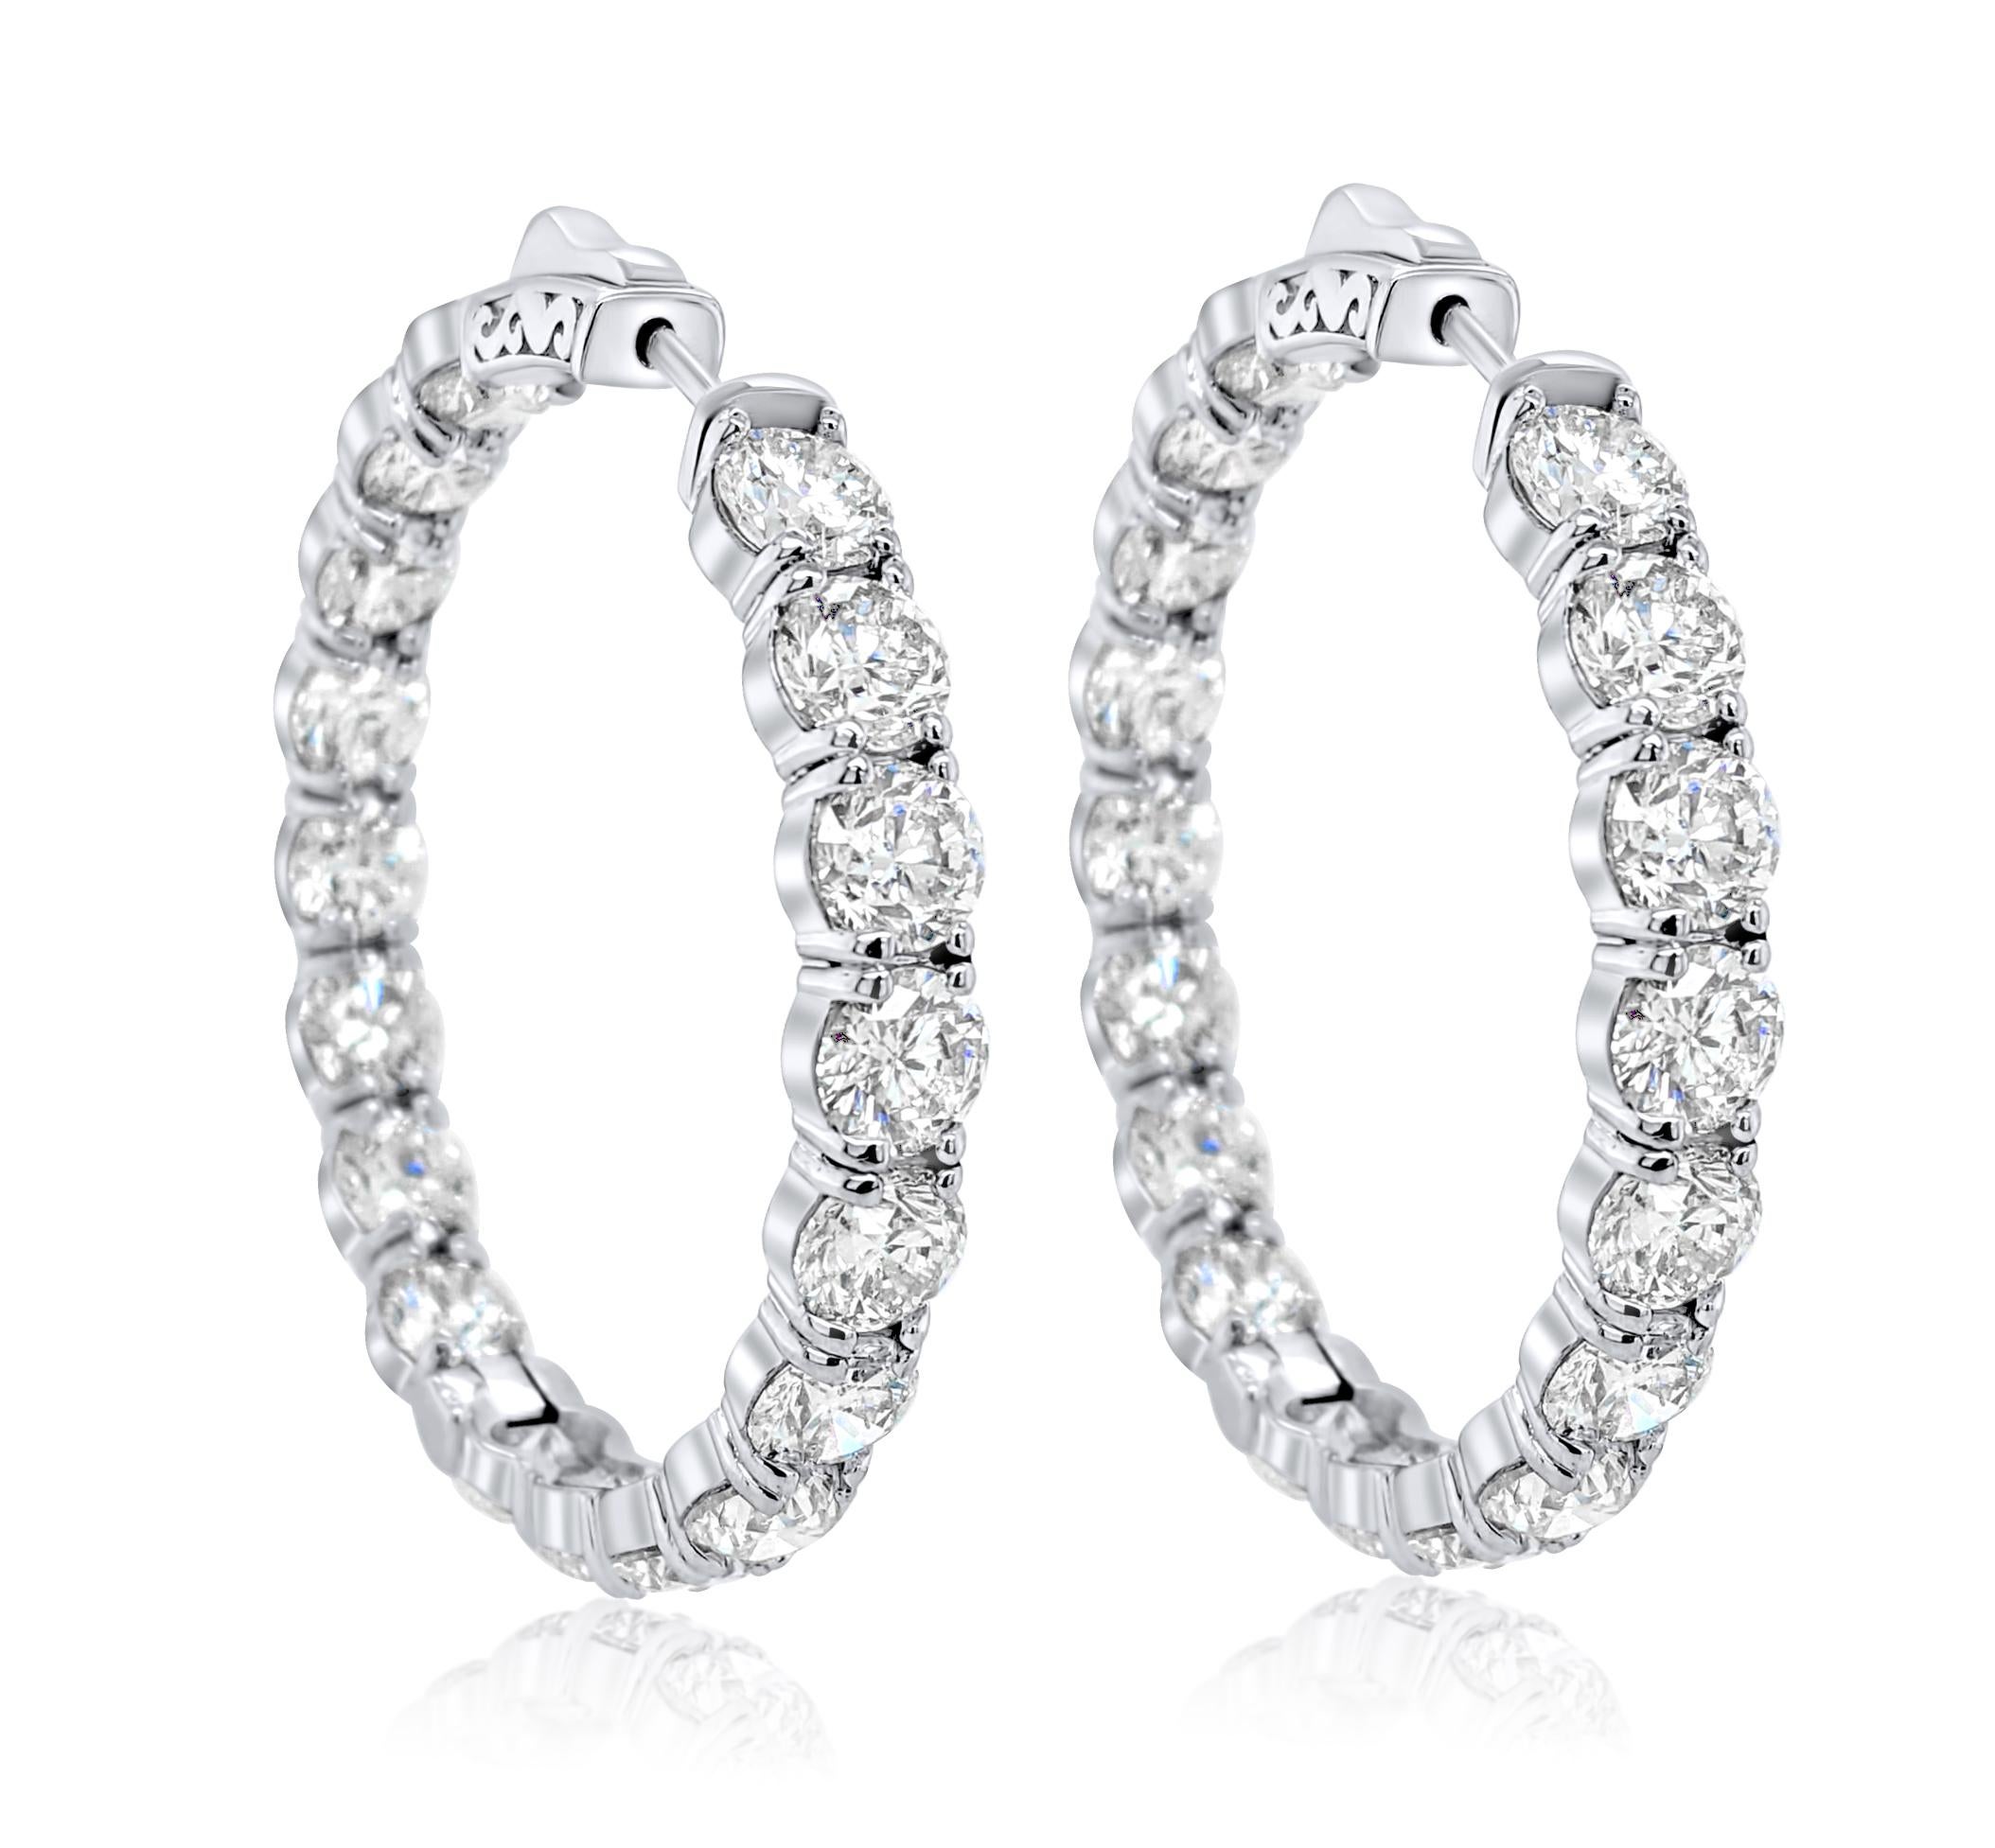 18K White Gold Diamond Earrings featuring 19.00 Carat T.W. of Natural Diamonds

Underline your look with this sharp 18K White Gold Diamond Earrings. High quality Diamonds. This Earrings will underline your exquisite look for any occasion.

. is a